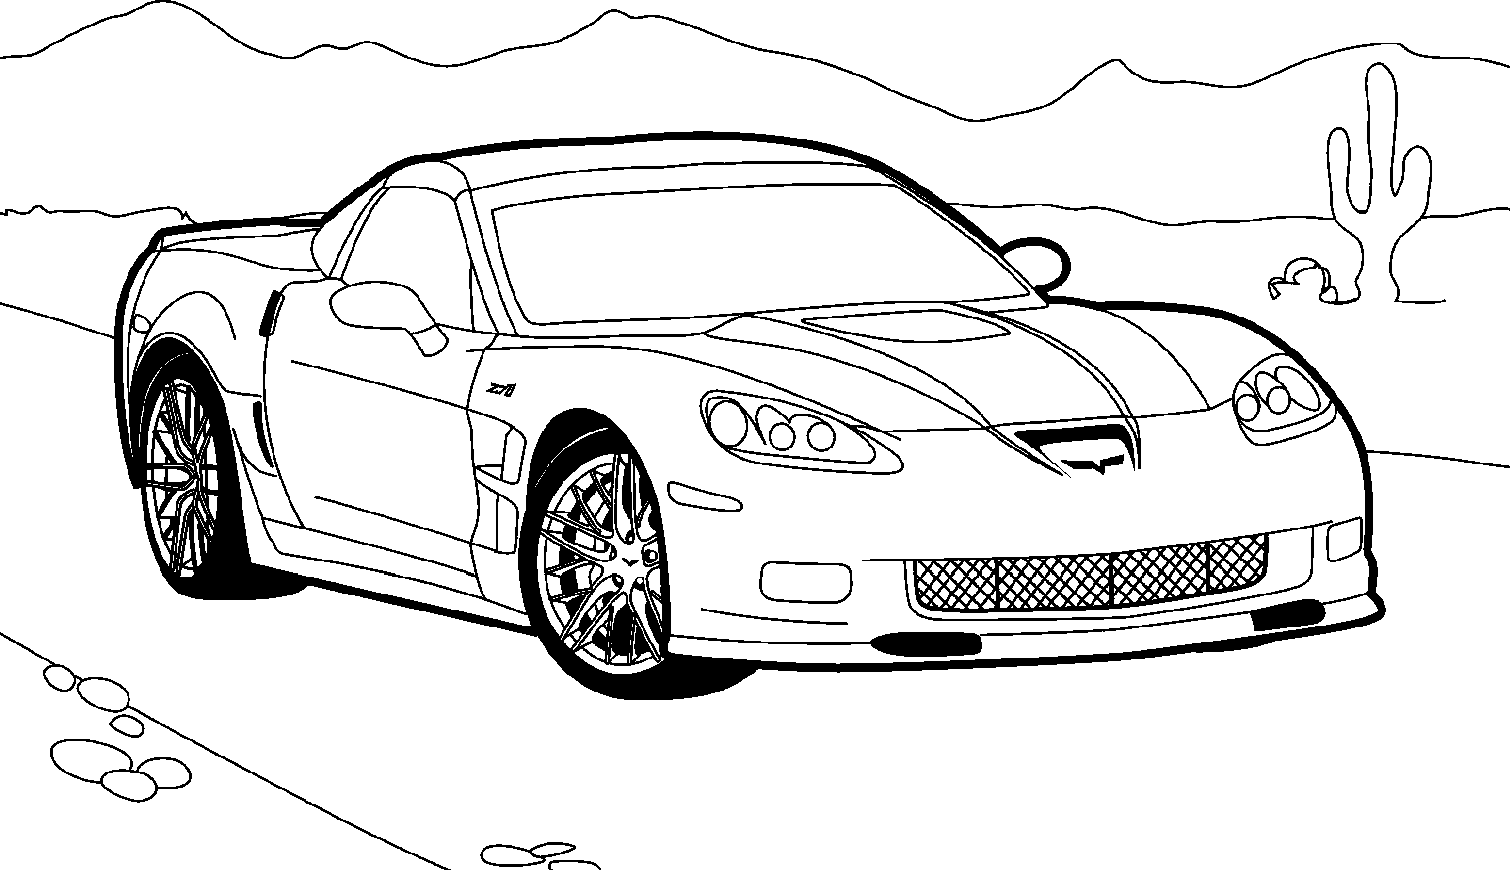 race car black and white - Race Car Clipart Black And White